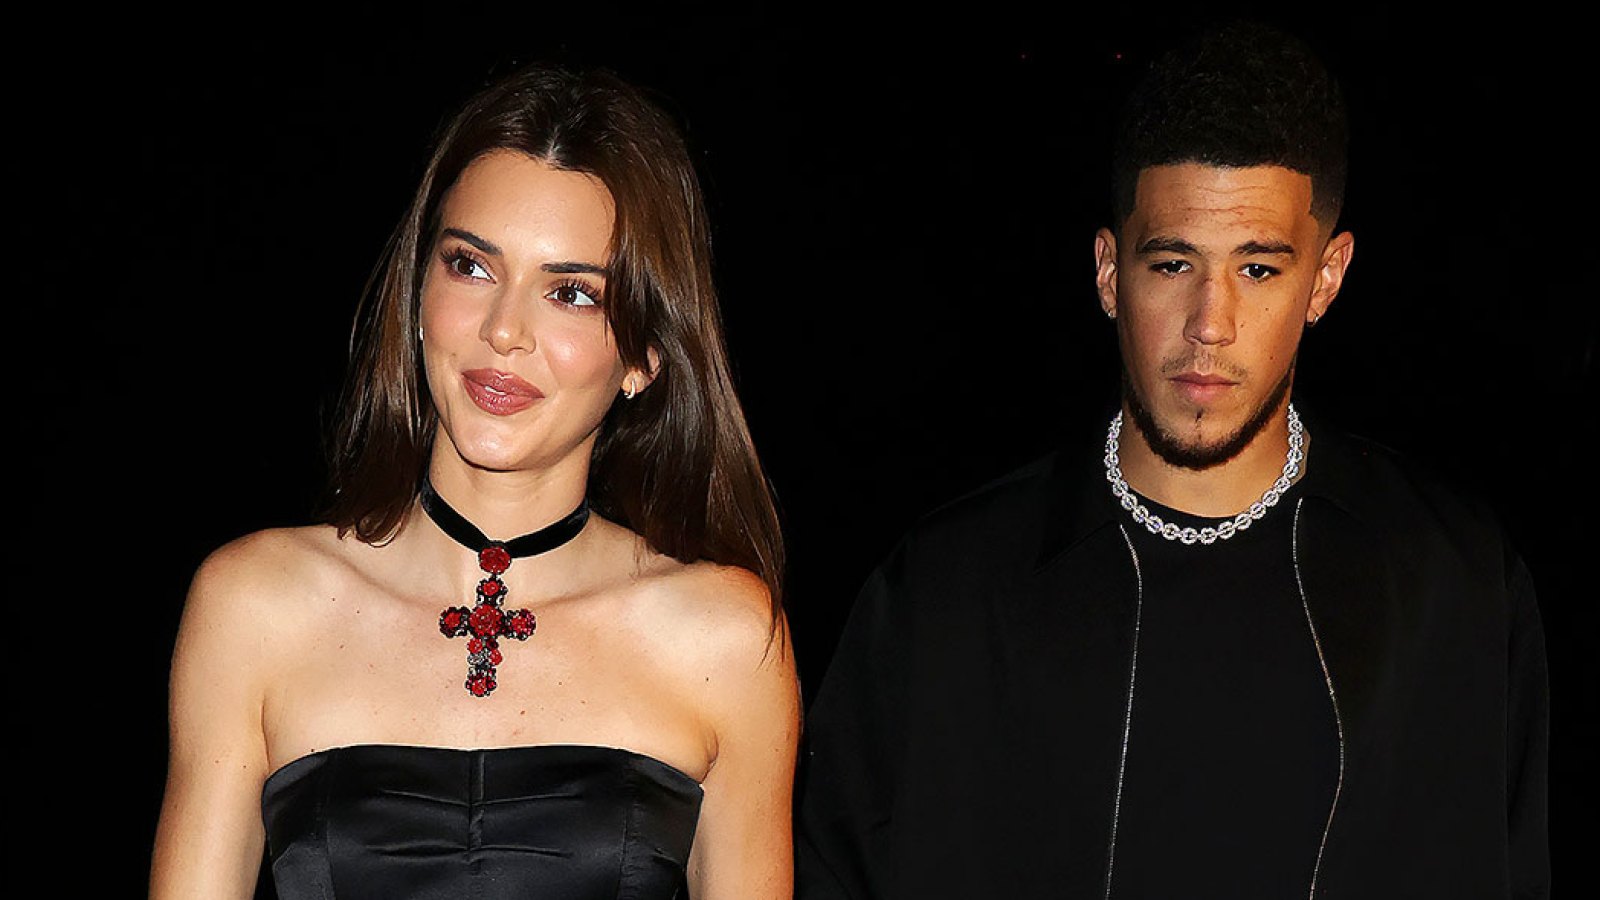 Devin Booker and Kendall Jenner Are Working on Their Relationship